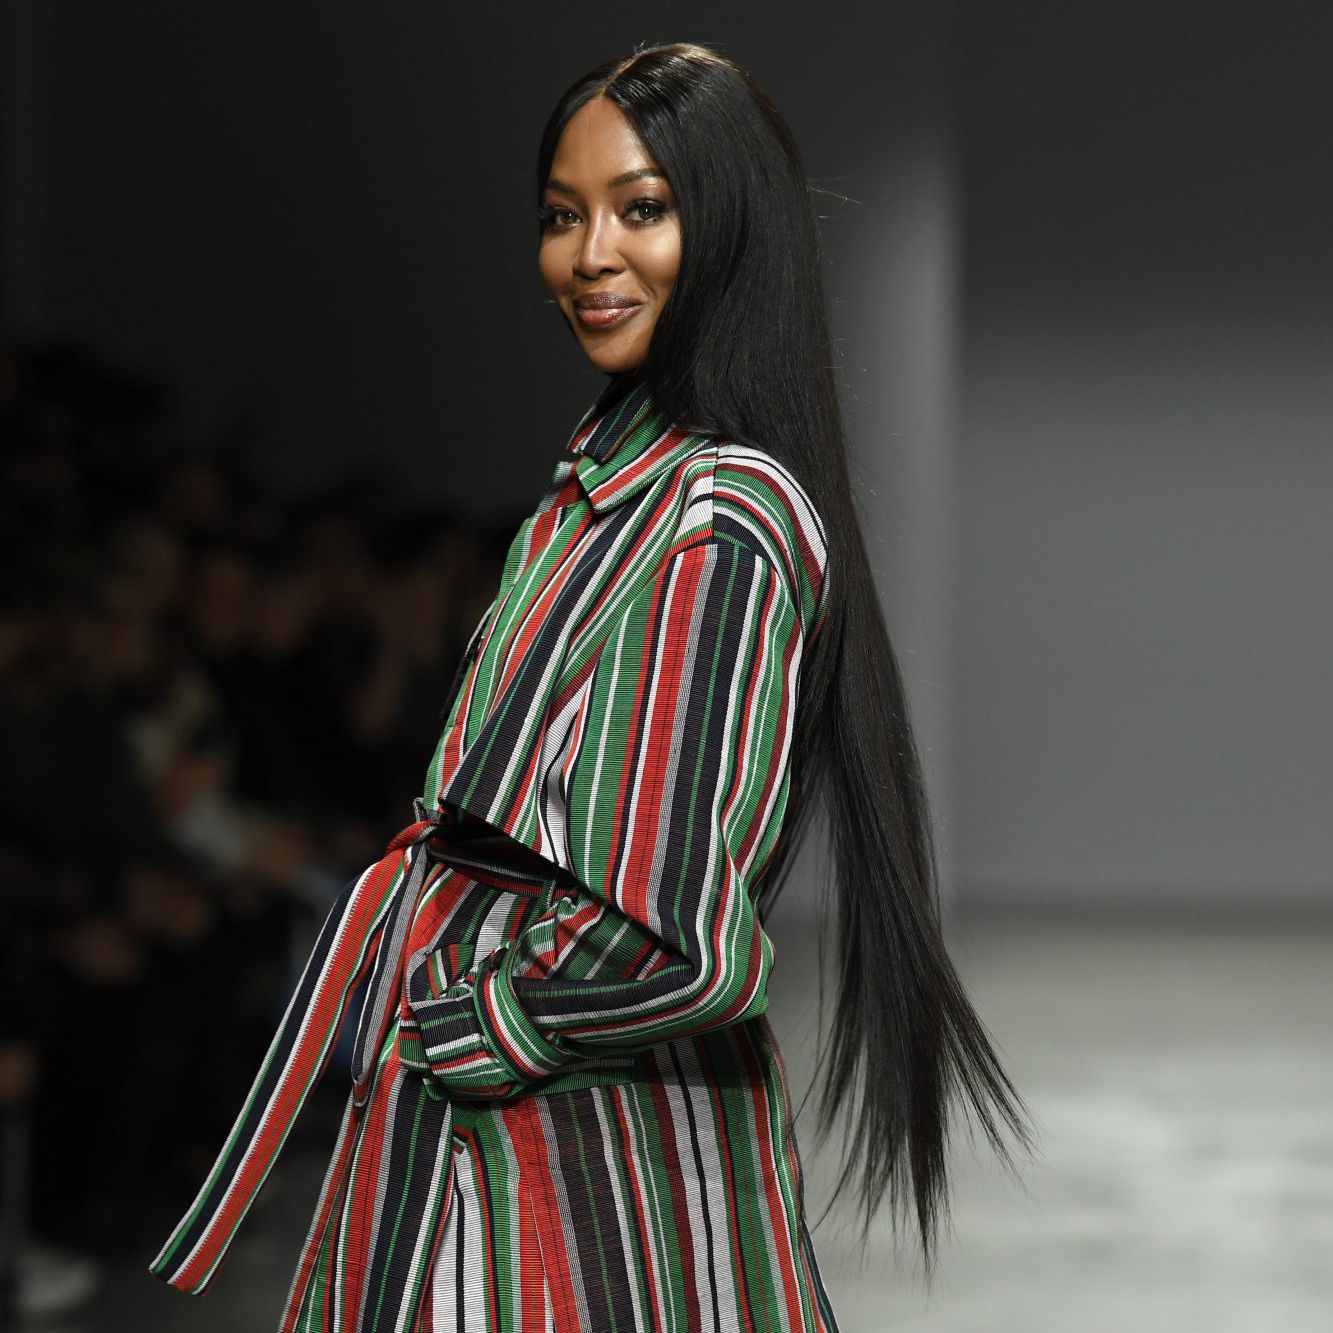 Naomi Campbell wearing a multi-colored striped dress and walking on ramp